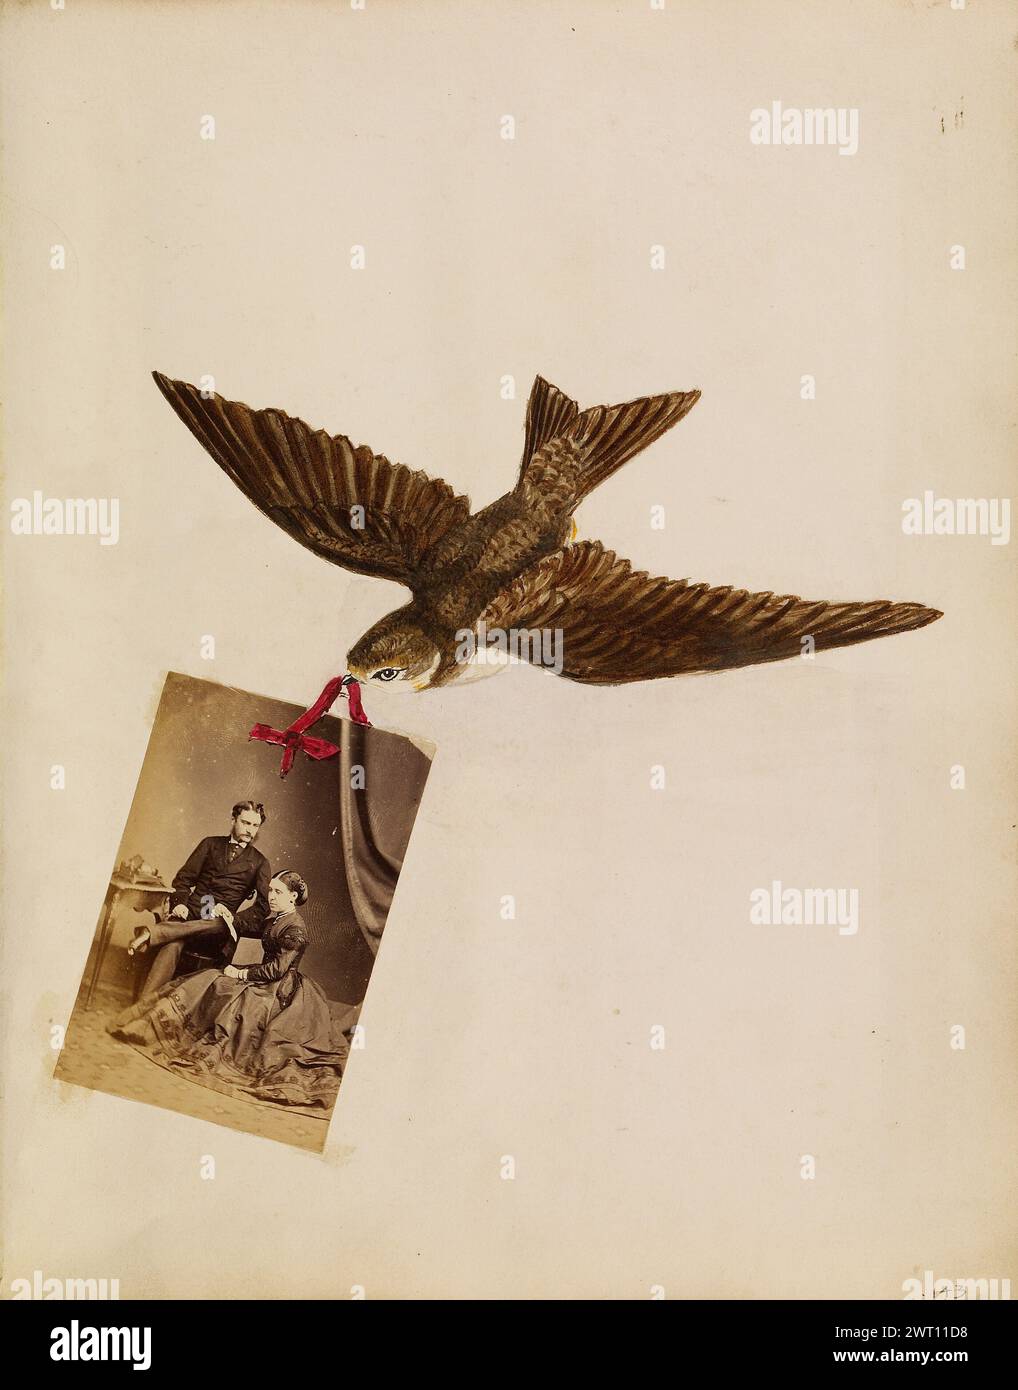 Photo collage of bird carrying portrait of Lord and Lady Yarborough. Unknown about 1865 A photo collage of an illustrated bird holding onto a carte-de-visite by a red ribbon. The bird is brown and has its wings spread. The portrait it carries depicts Charles Anderson-Pelham, Lord Yarborough, sitting while his wife, Victoria Alexandrina Hare, Lady Yarborough, kneeling beside him. Stock Photo